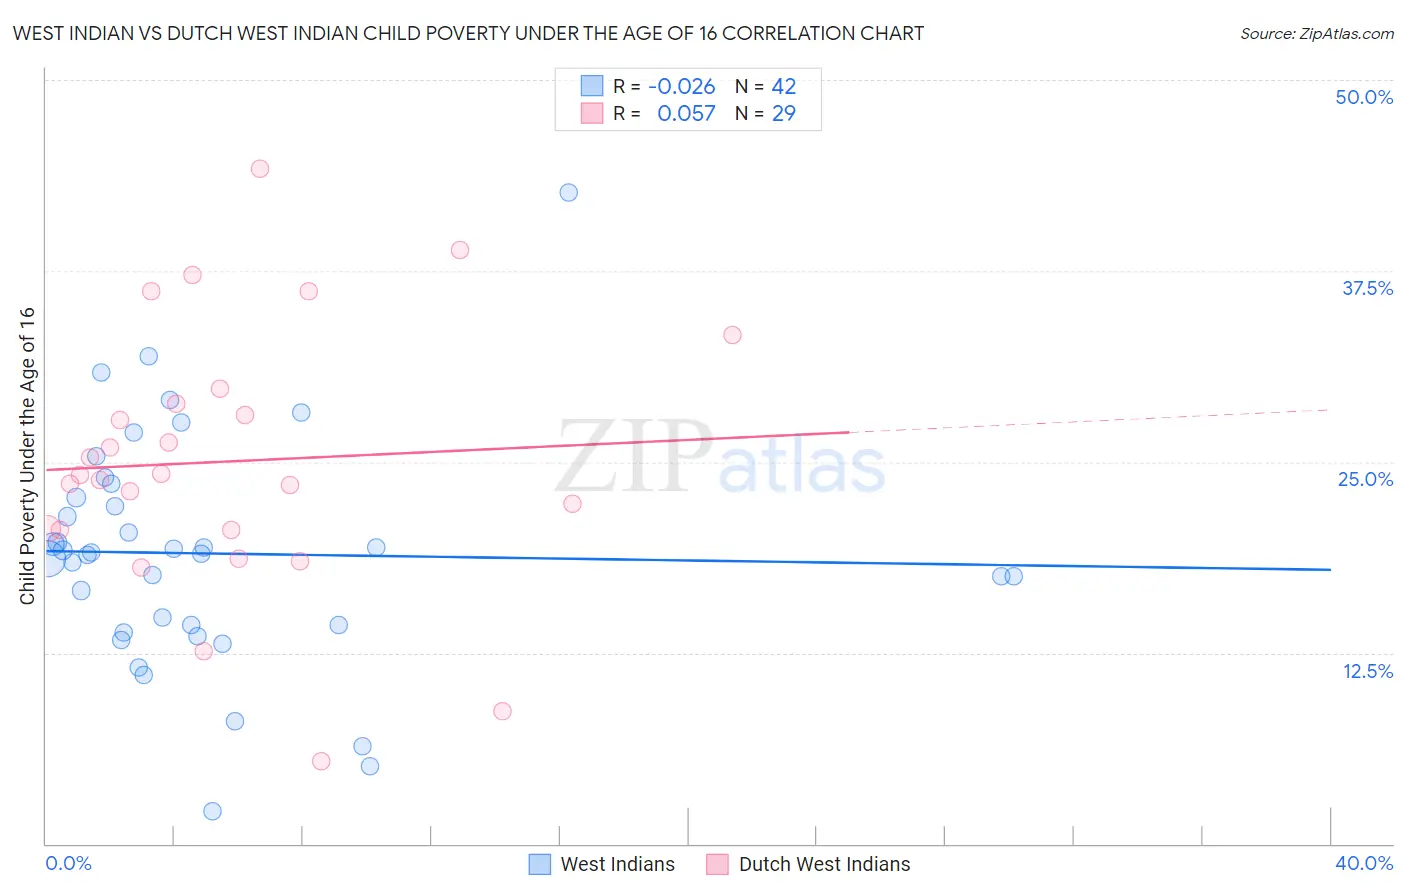 West Indian vs Dutch West Indian Child Poverty Under the Age of 16